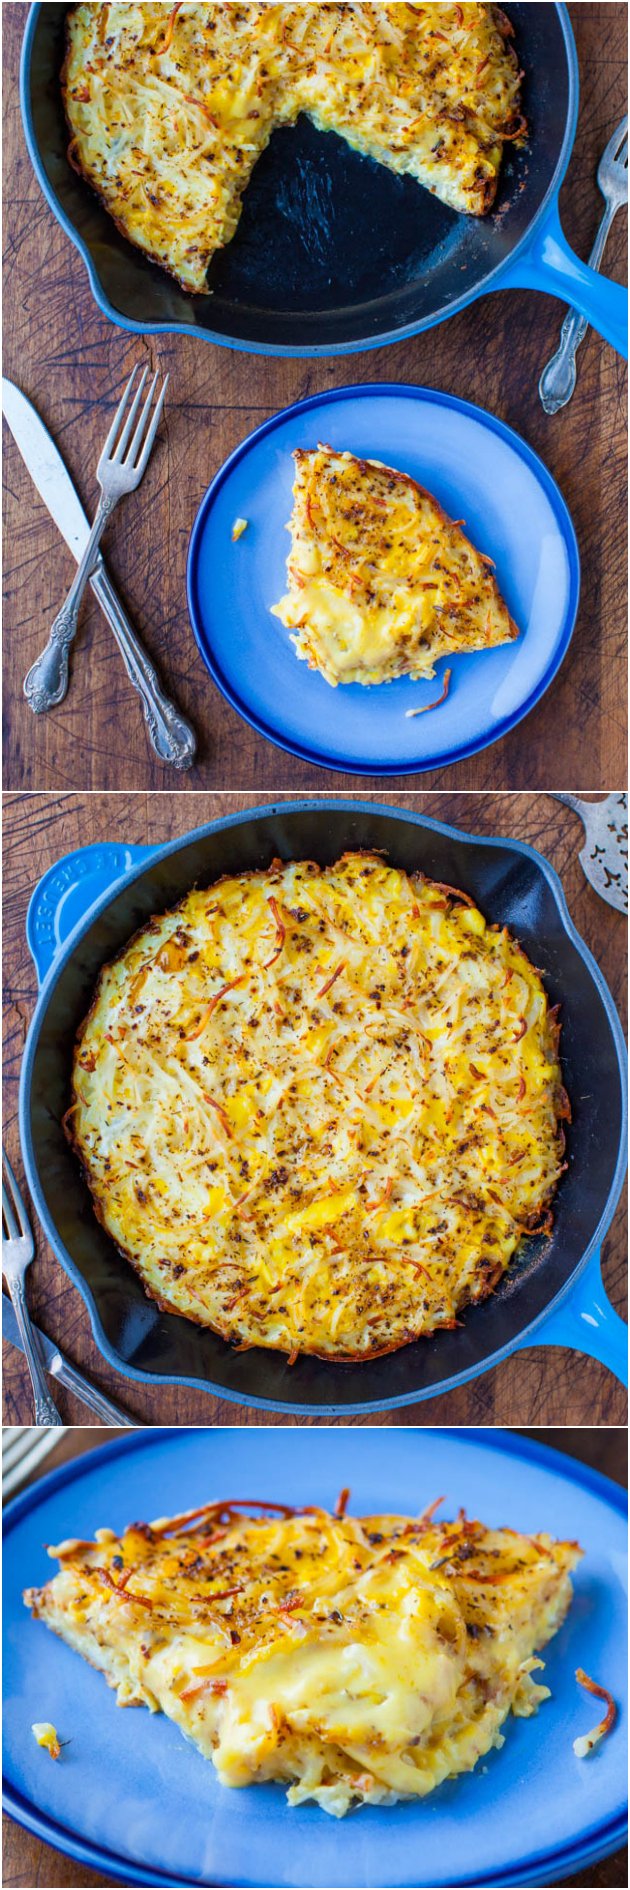 Creamy and Crispy Hash Browns Frittata (vegetarian, gluten-free) - Soft, creamy eggs with crispy, crunchy hash browns are a perfect match! Easy comfort-food recipe that's great for breakfast, brunch, or brinner (breakfast-for-dinner).